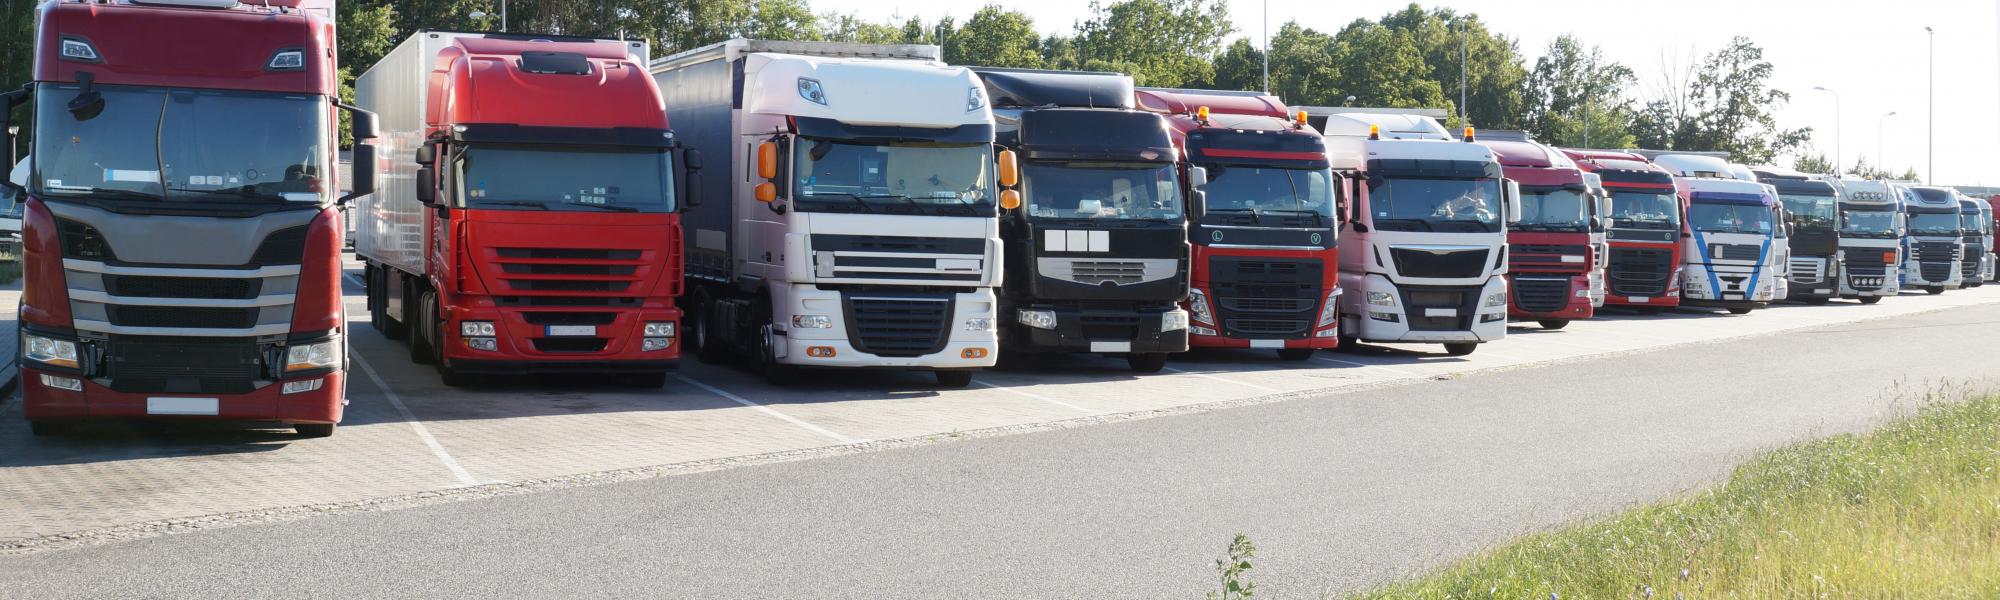 Help for stranded trucks and drivers in Ukraine